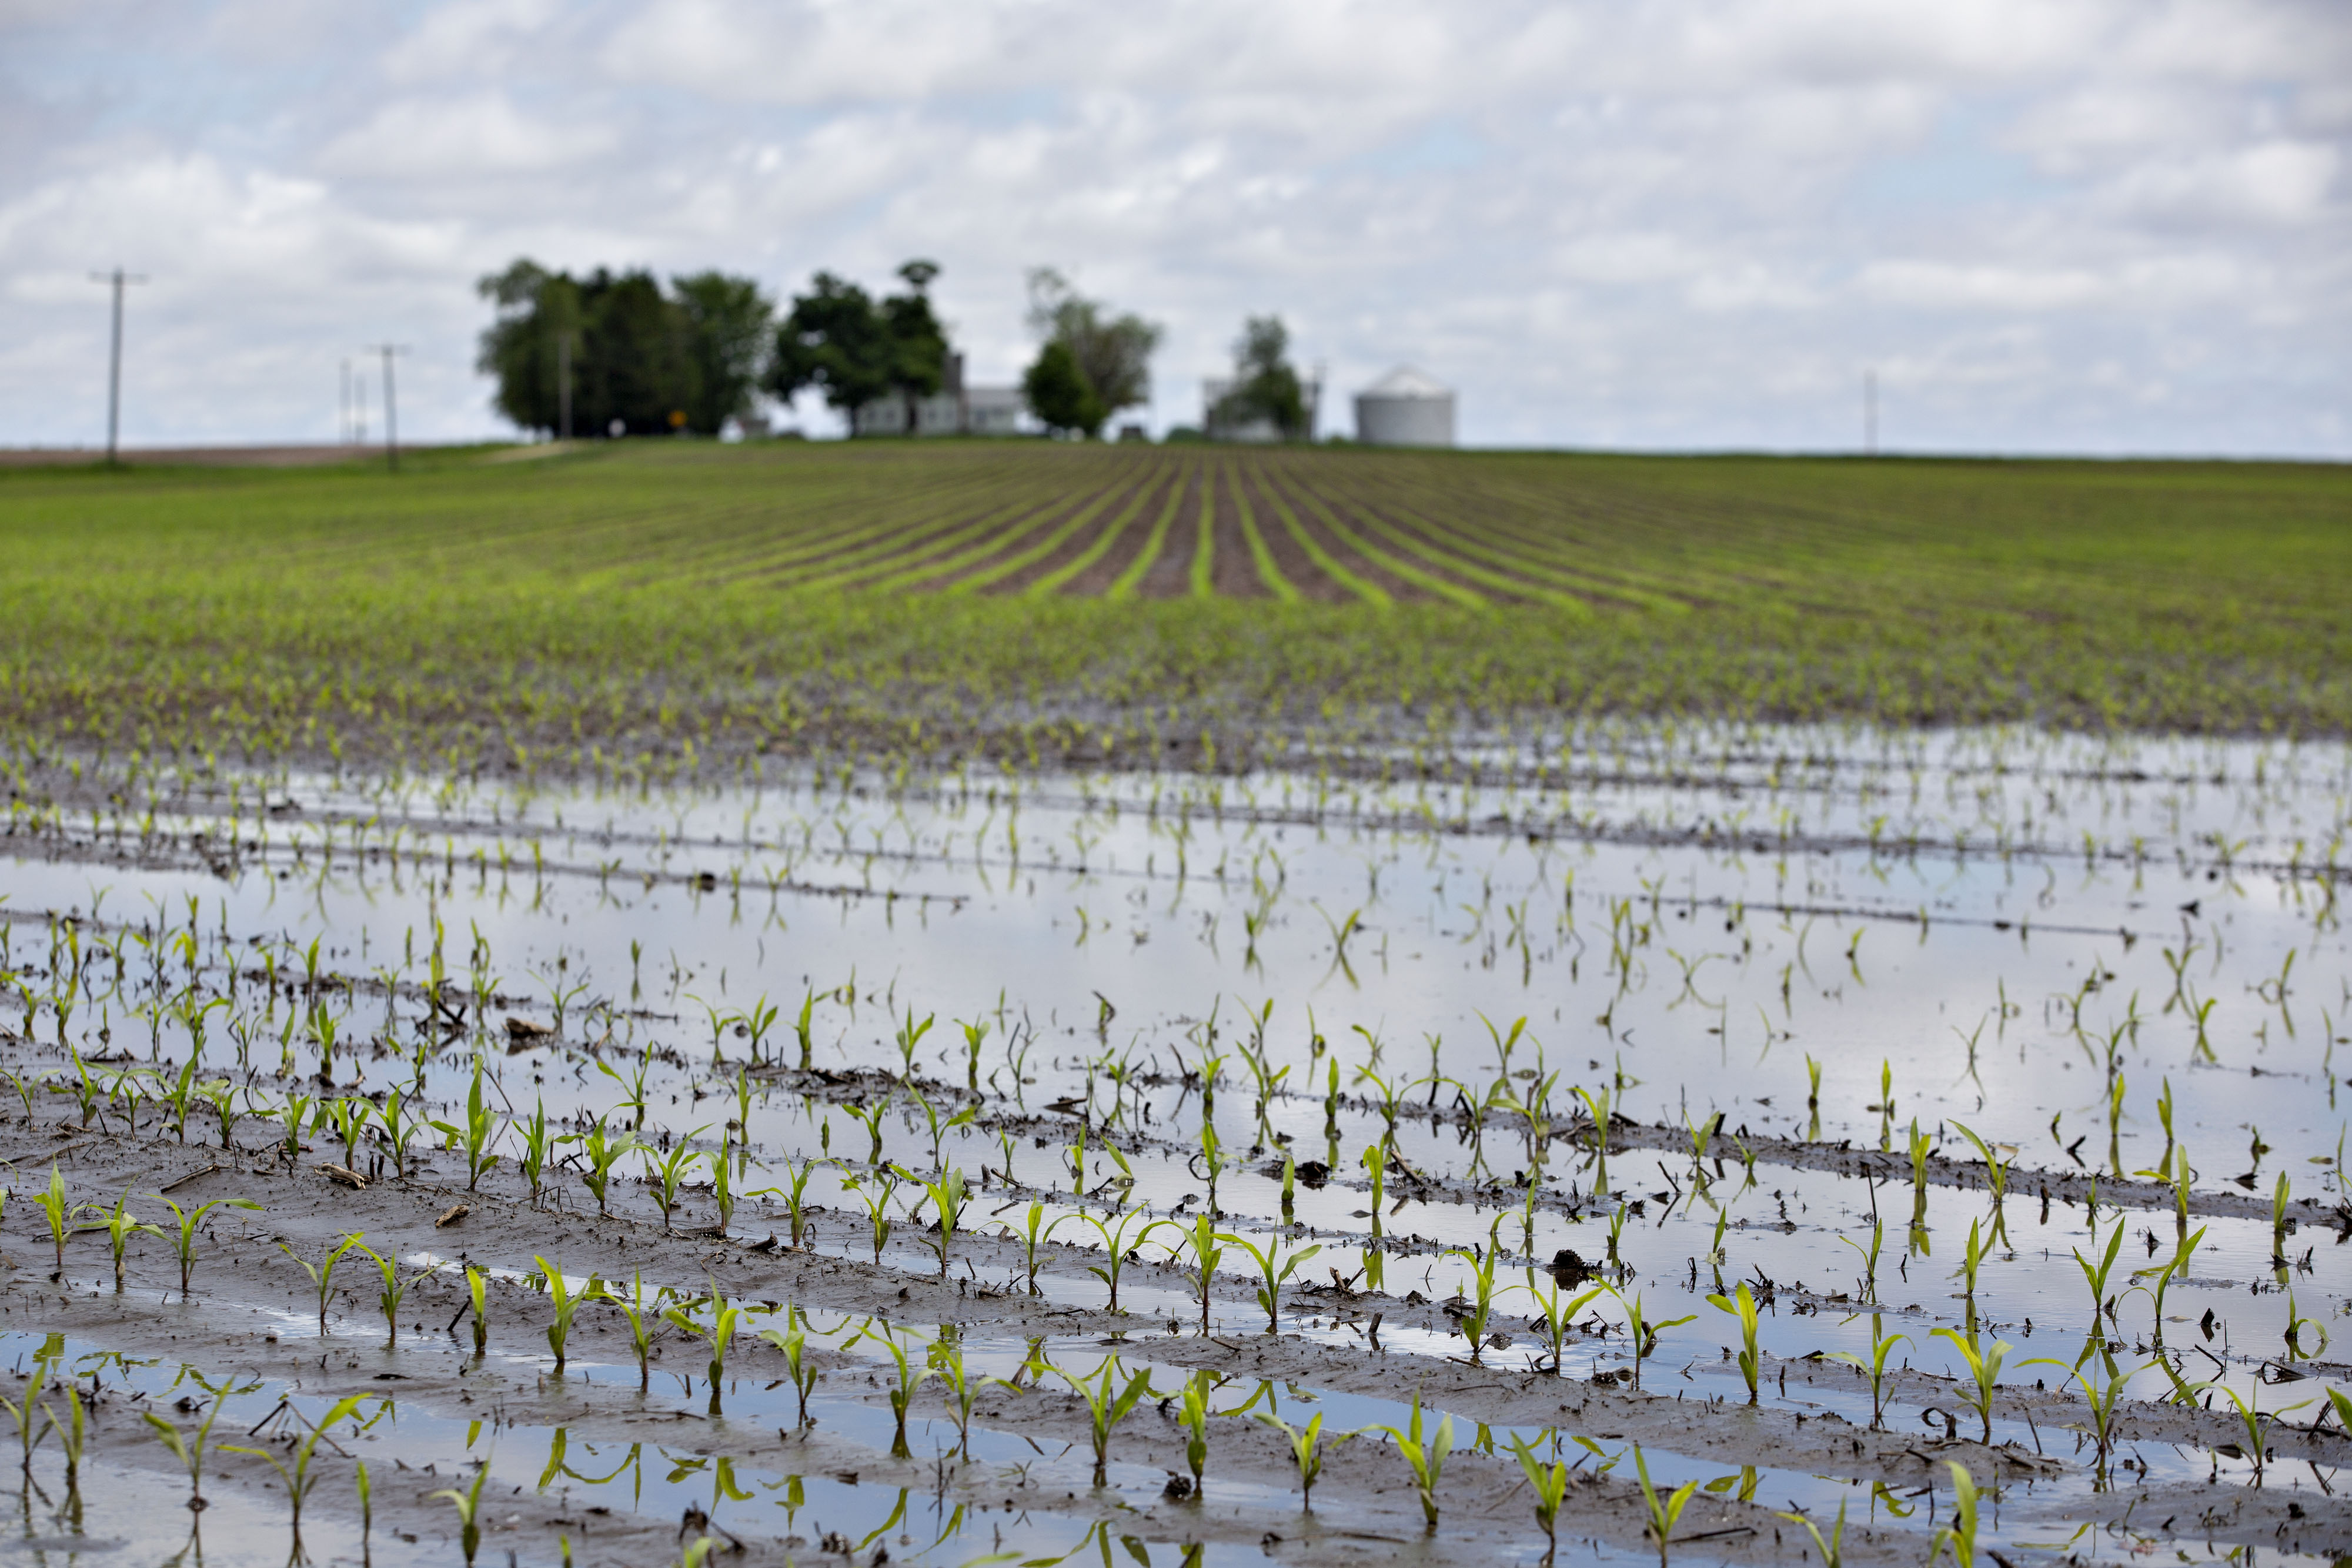 U.S. Farmers and Shippers Face Huge Losses From Flooding Again